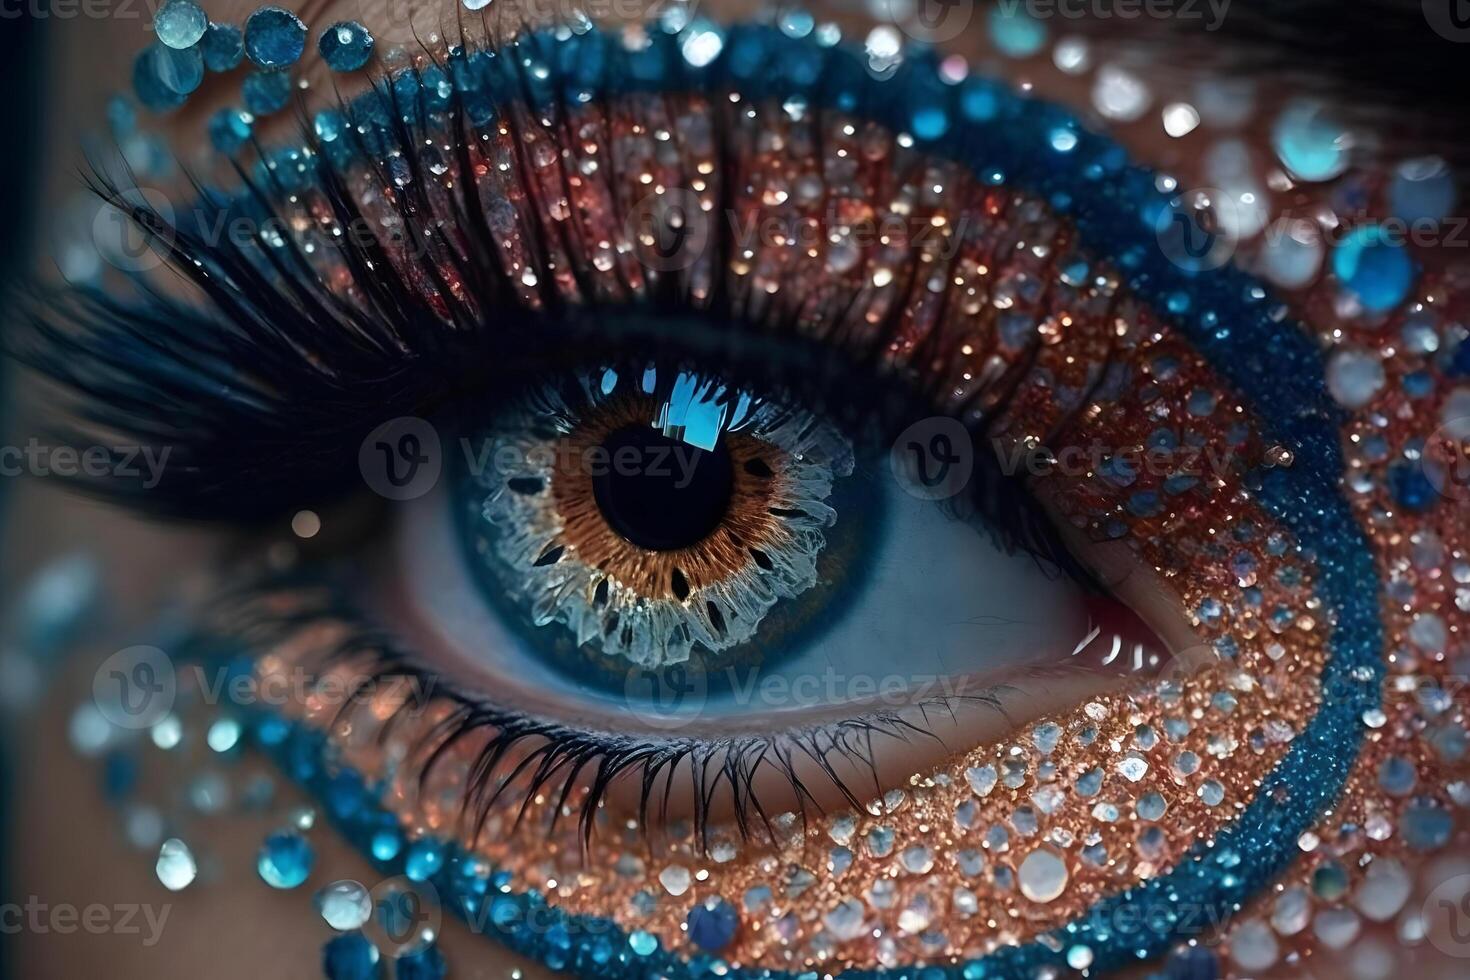 Woman eyes with beautiful glitter makeup. Neural network photo